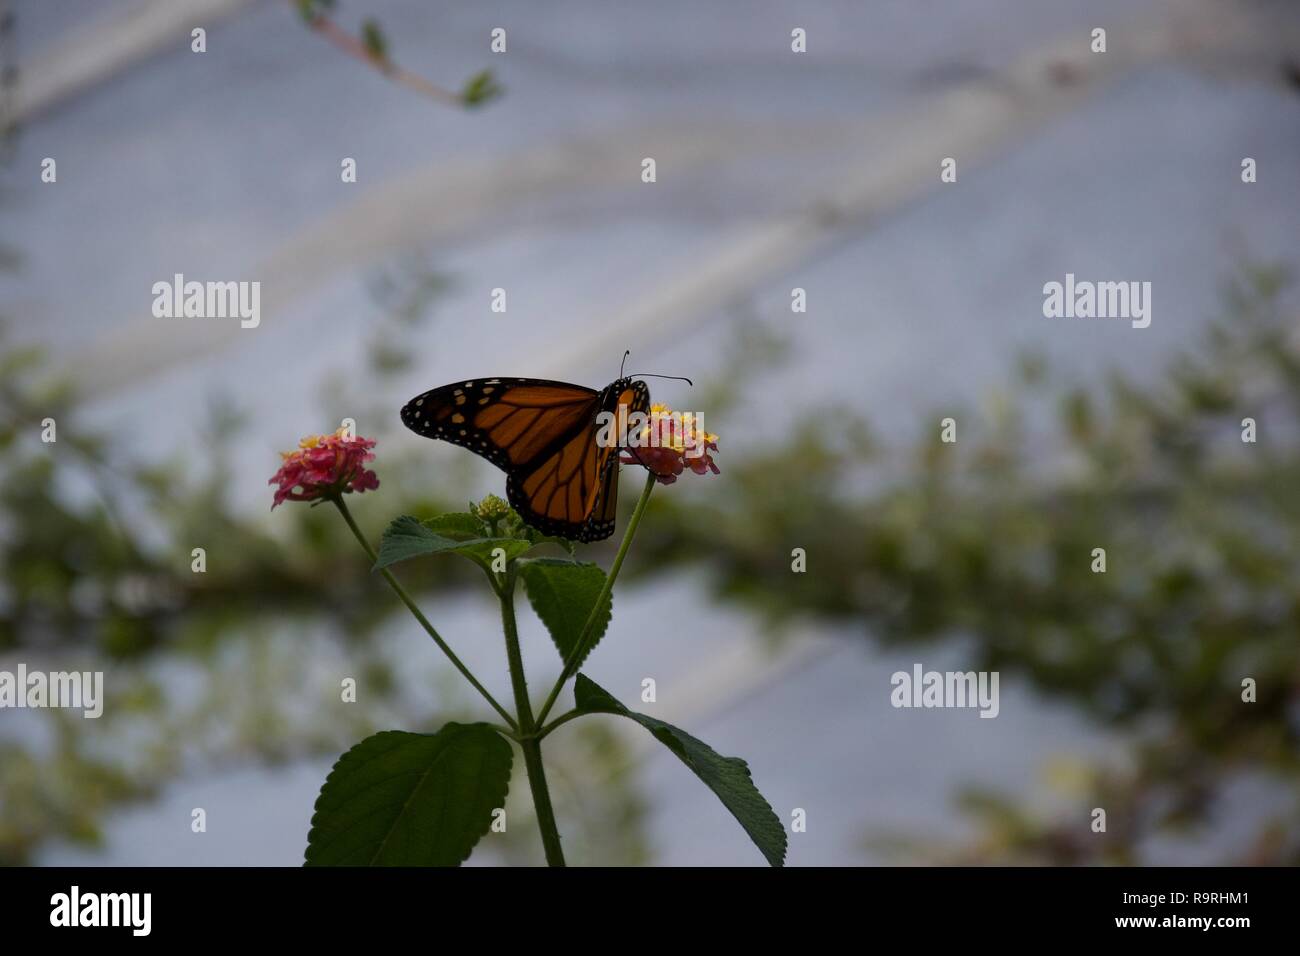 An orange and black butterfly lands on a little yellow flower, ready to sip nectar Stock Photo